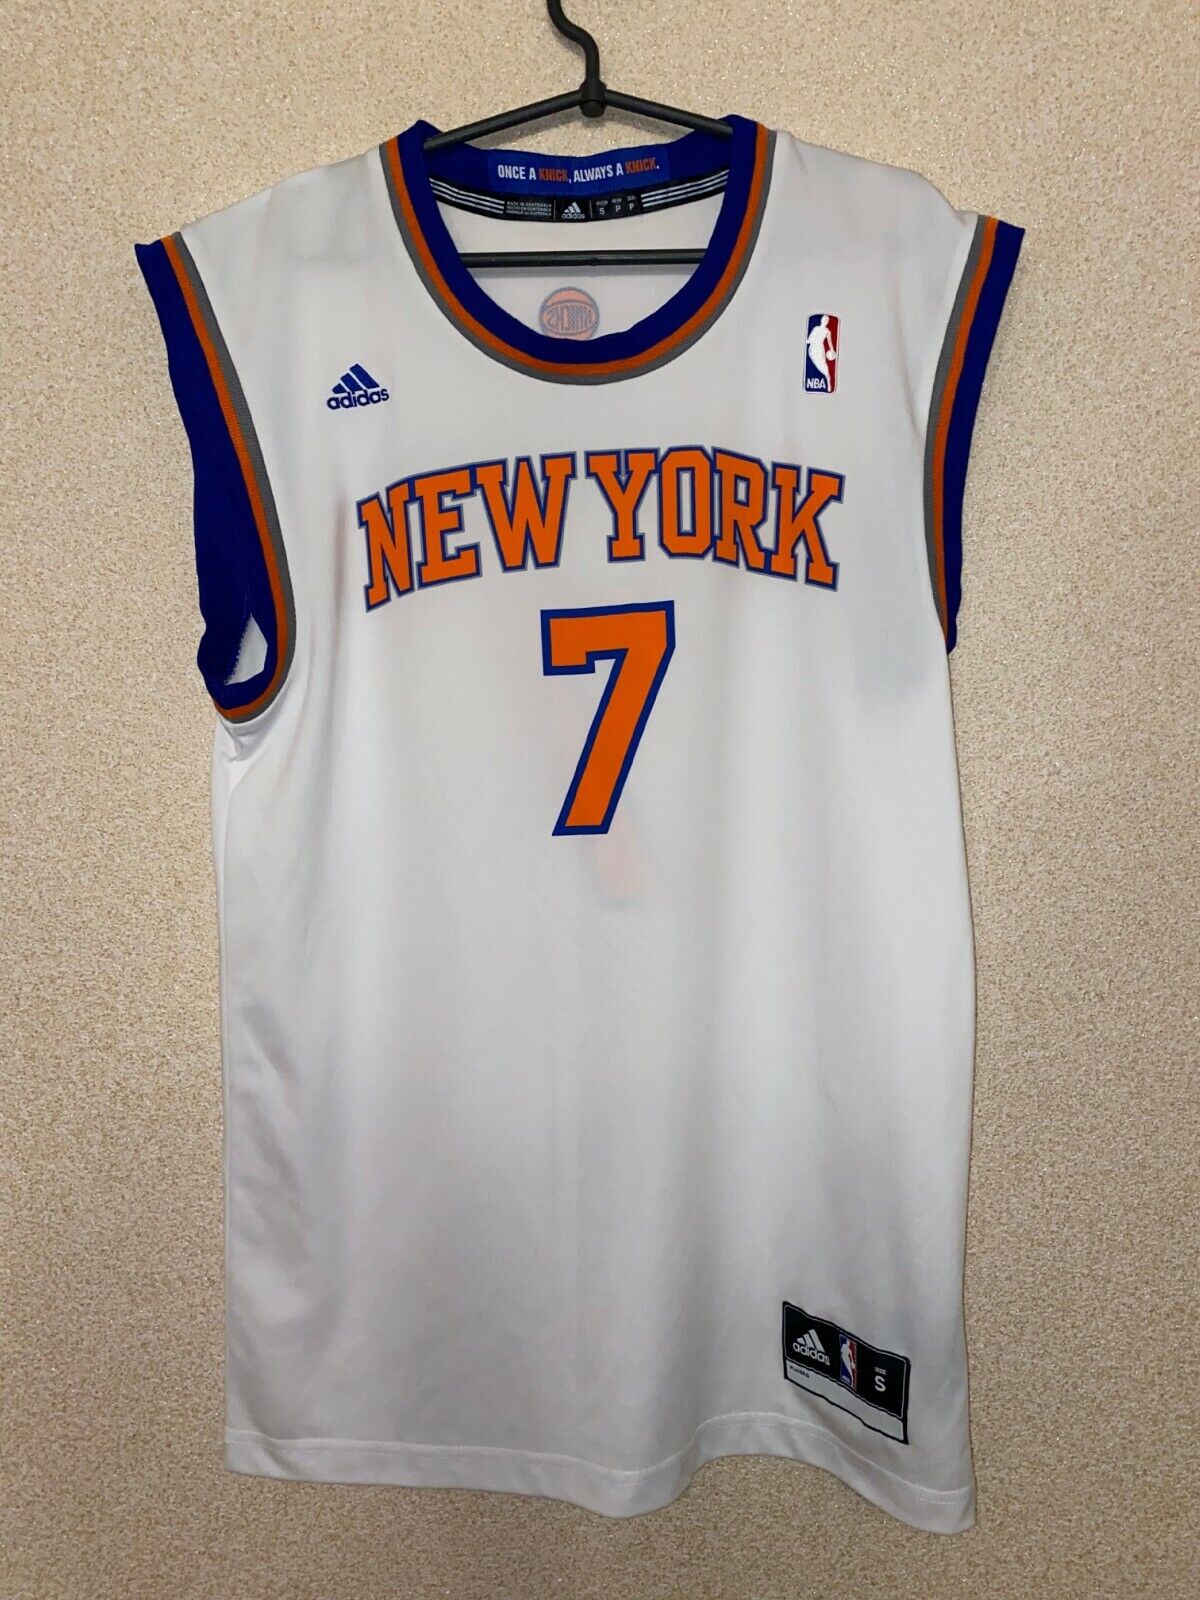 2012-14 New York Knicks Anthony #7 adidas Away Jersey (Excellent) S